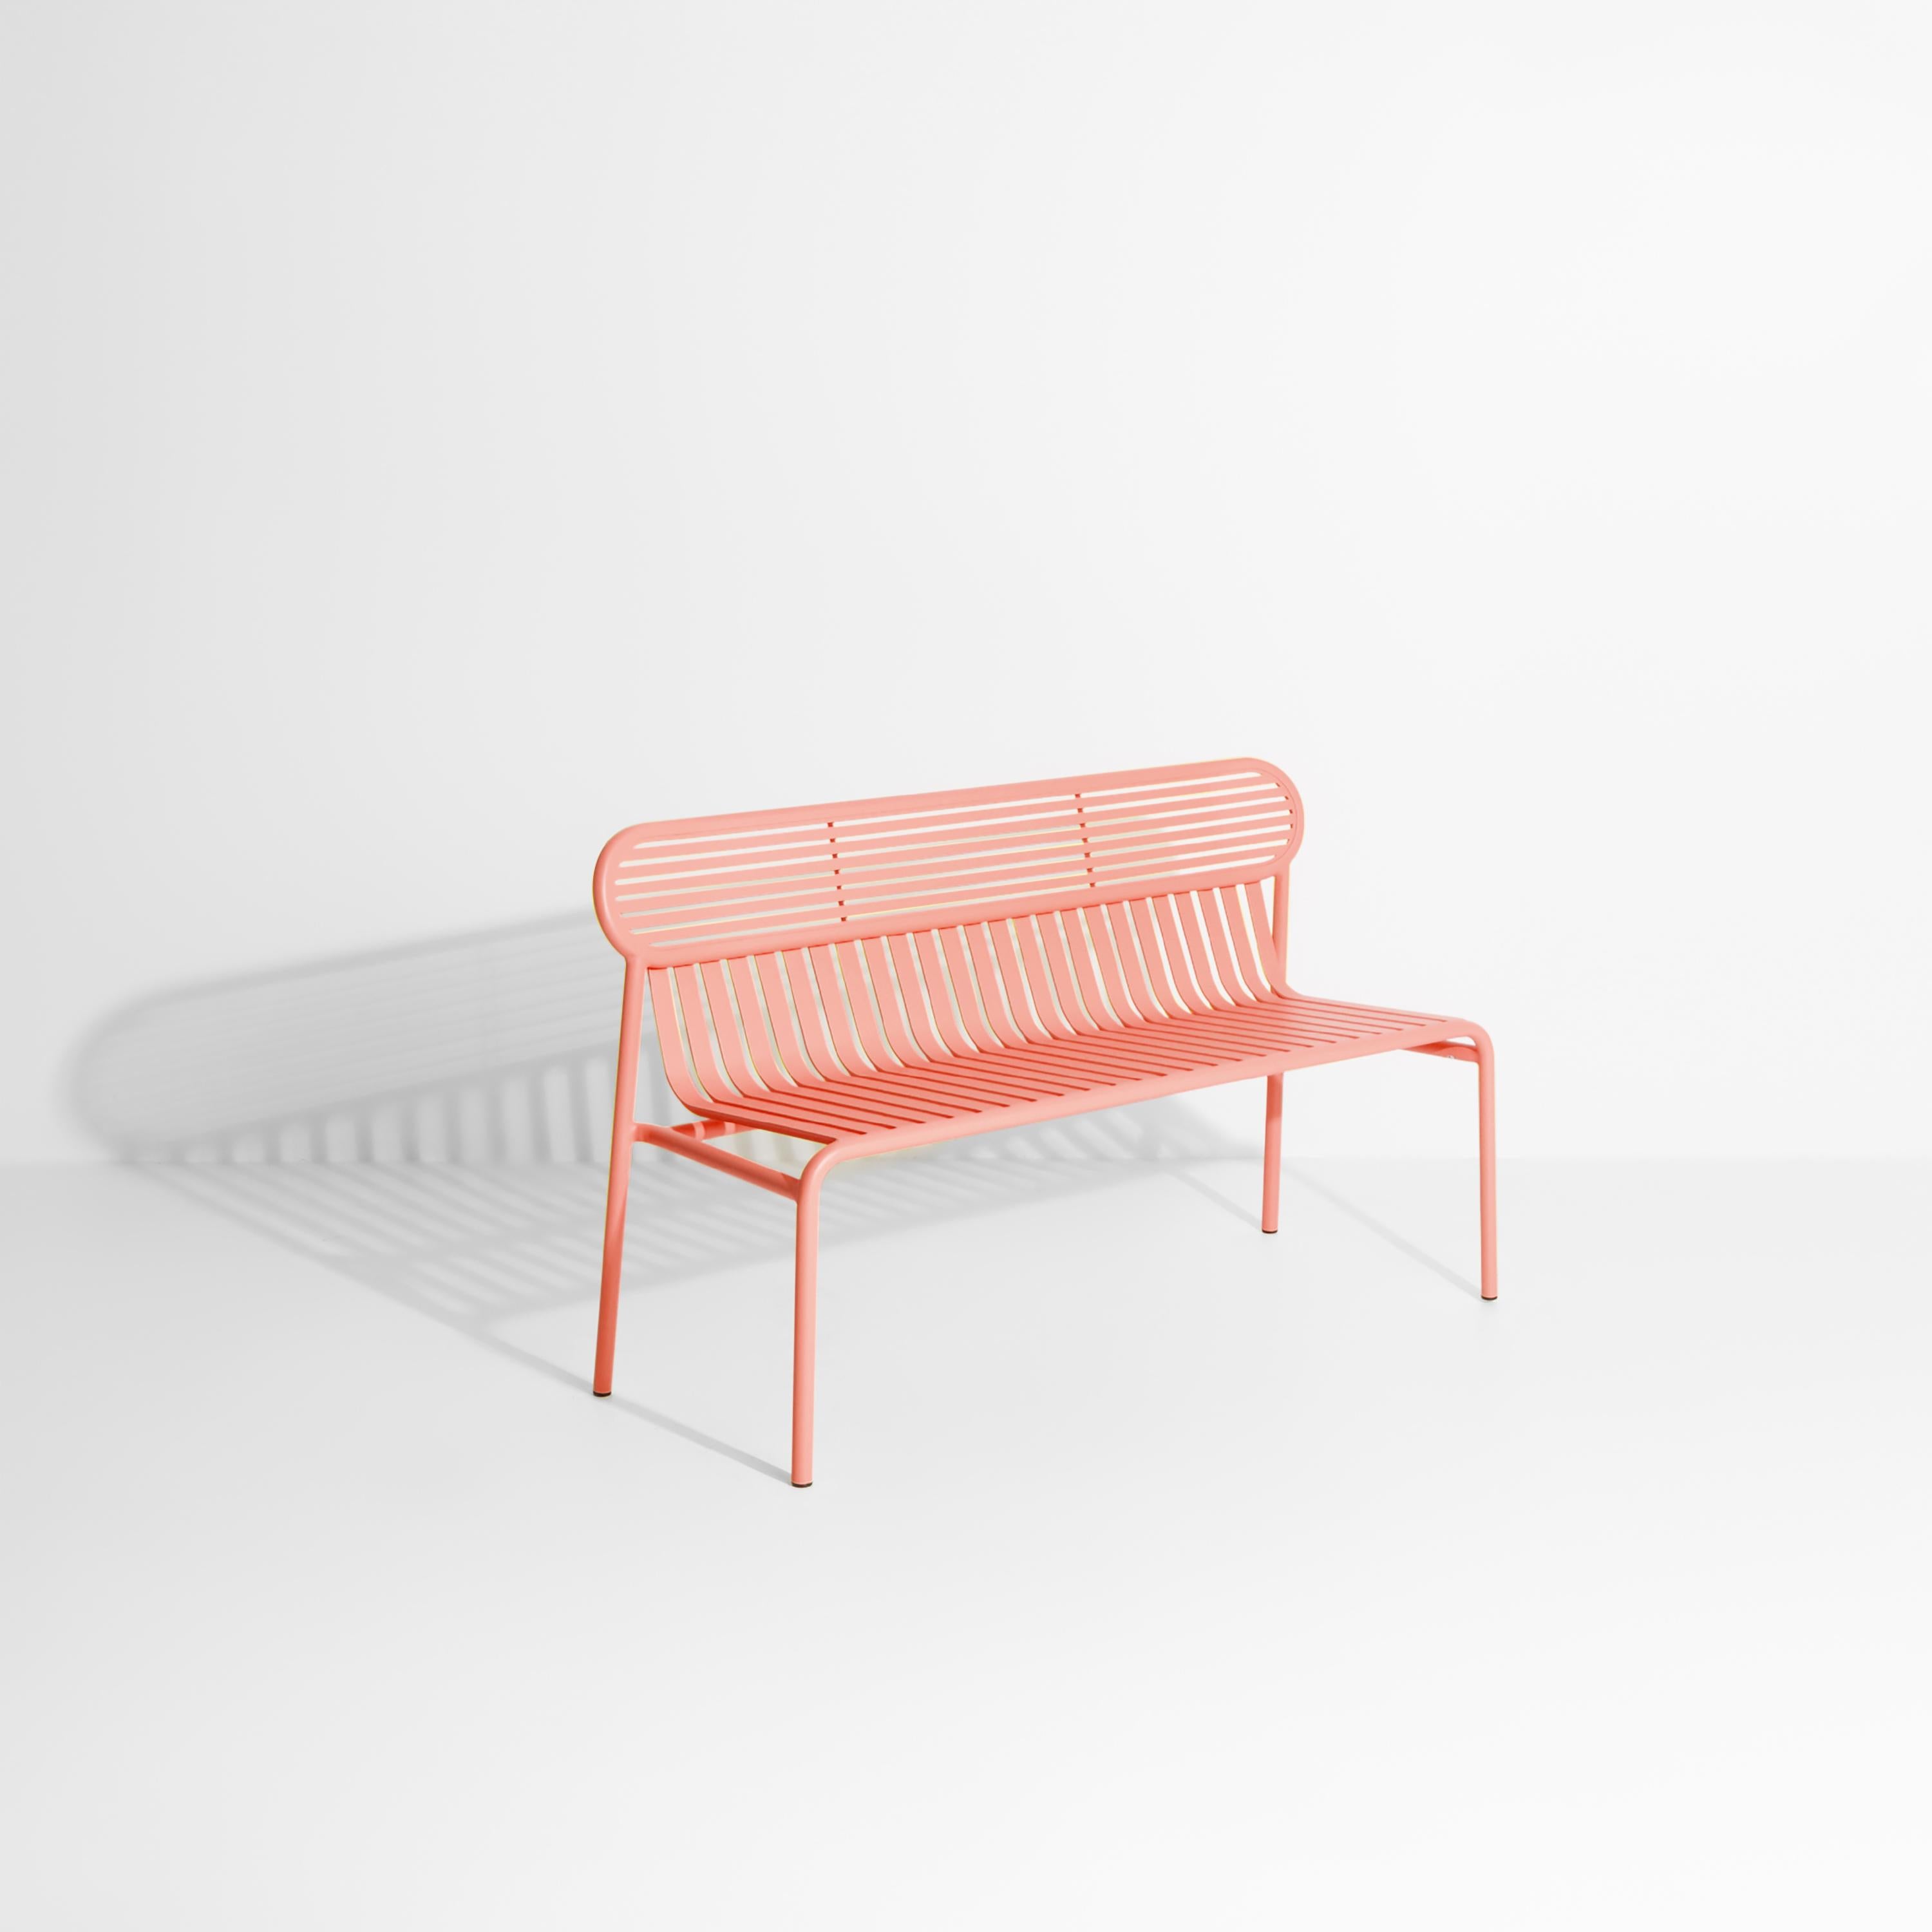 Petite Friture Week-End Bench in Coral Aluminium by Studio BrichetZiegler, 2017

The week-end collection is a full range of outdoor furniture, in aluminium grained epoxy paint, matt finish, that includes 18 functions and 8 colours for the retail